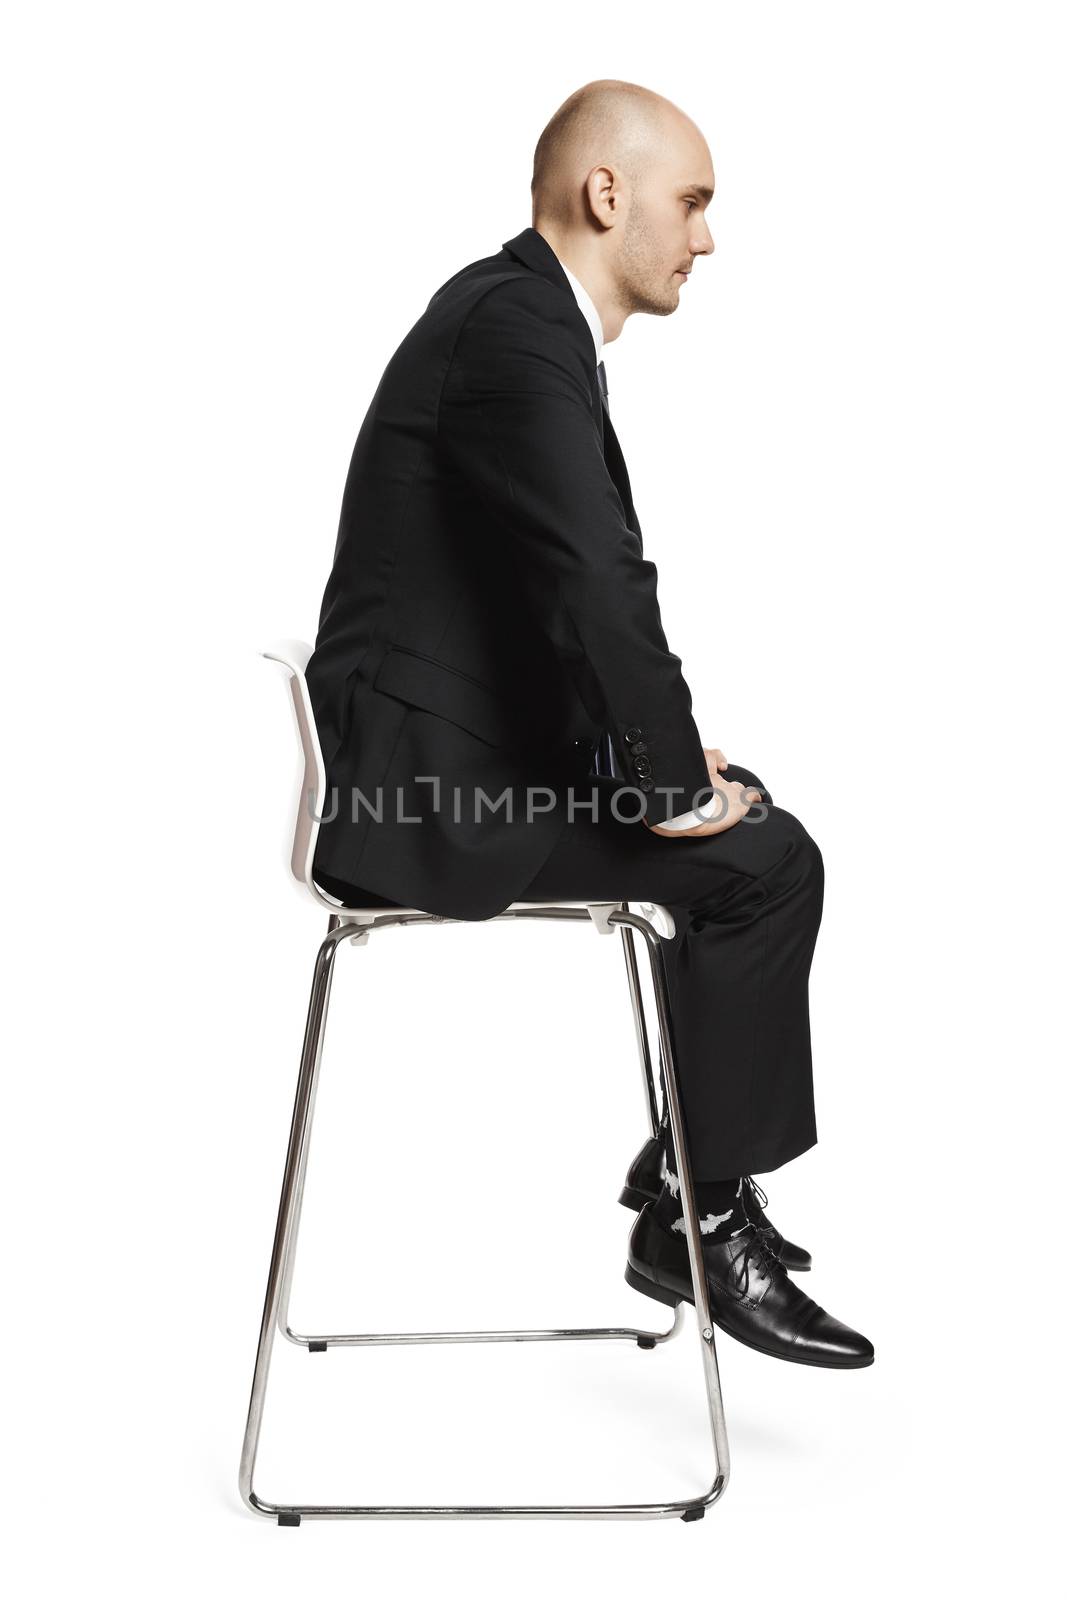 Profile view of young tired office worker sitting on a chair. Studio shot isolated on white background.